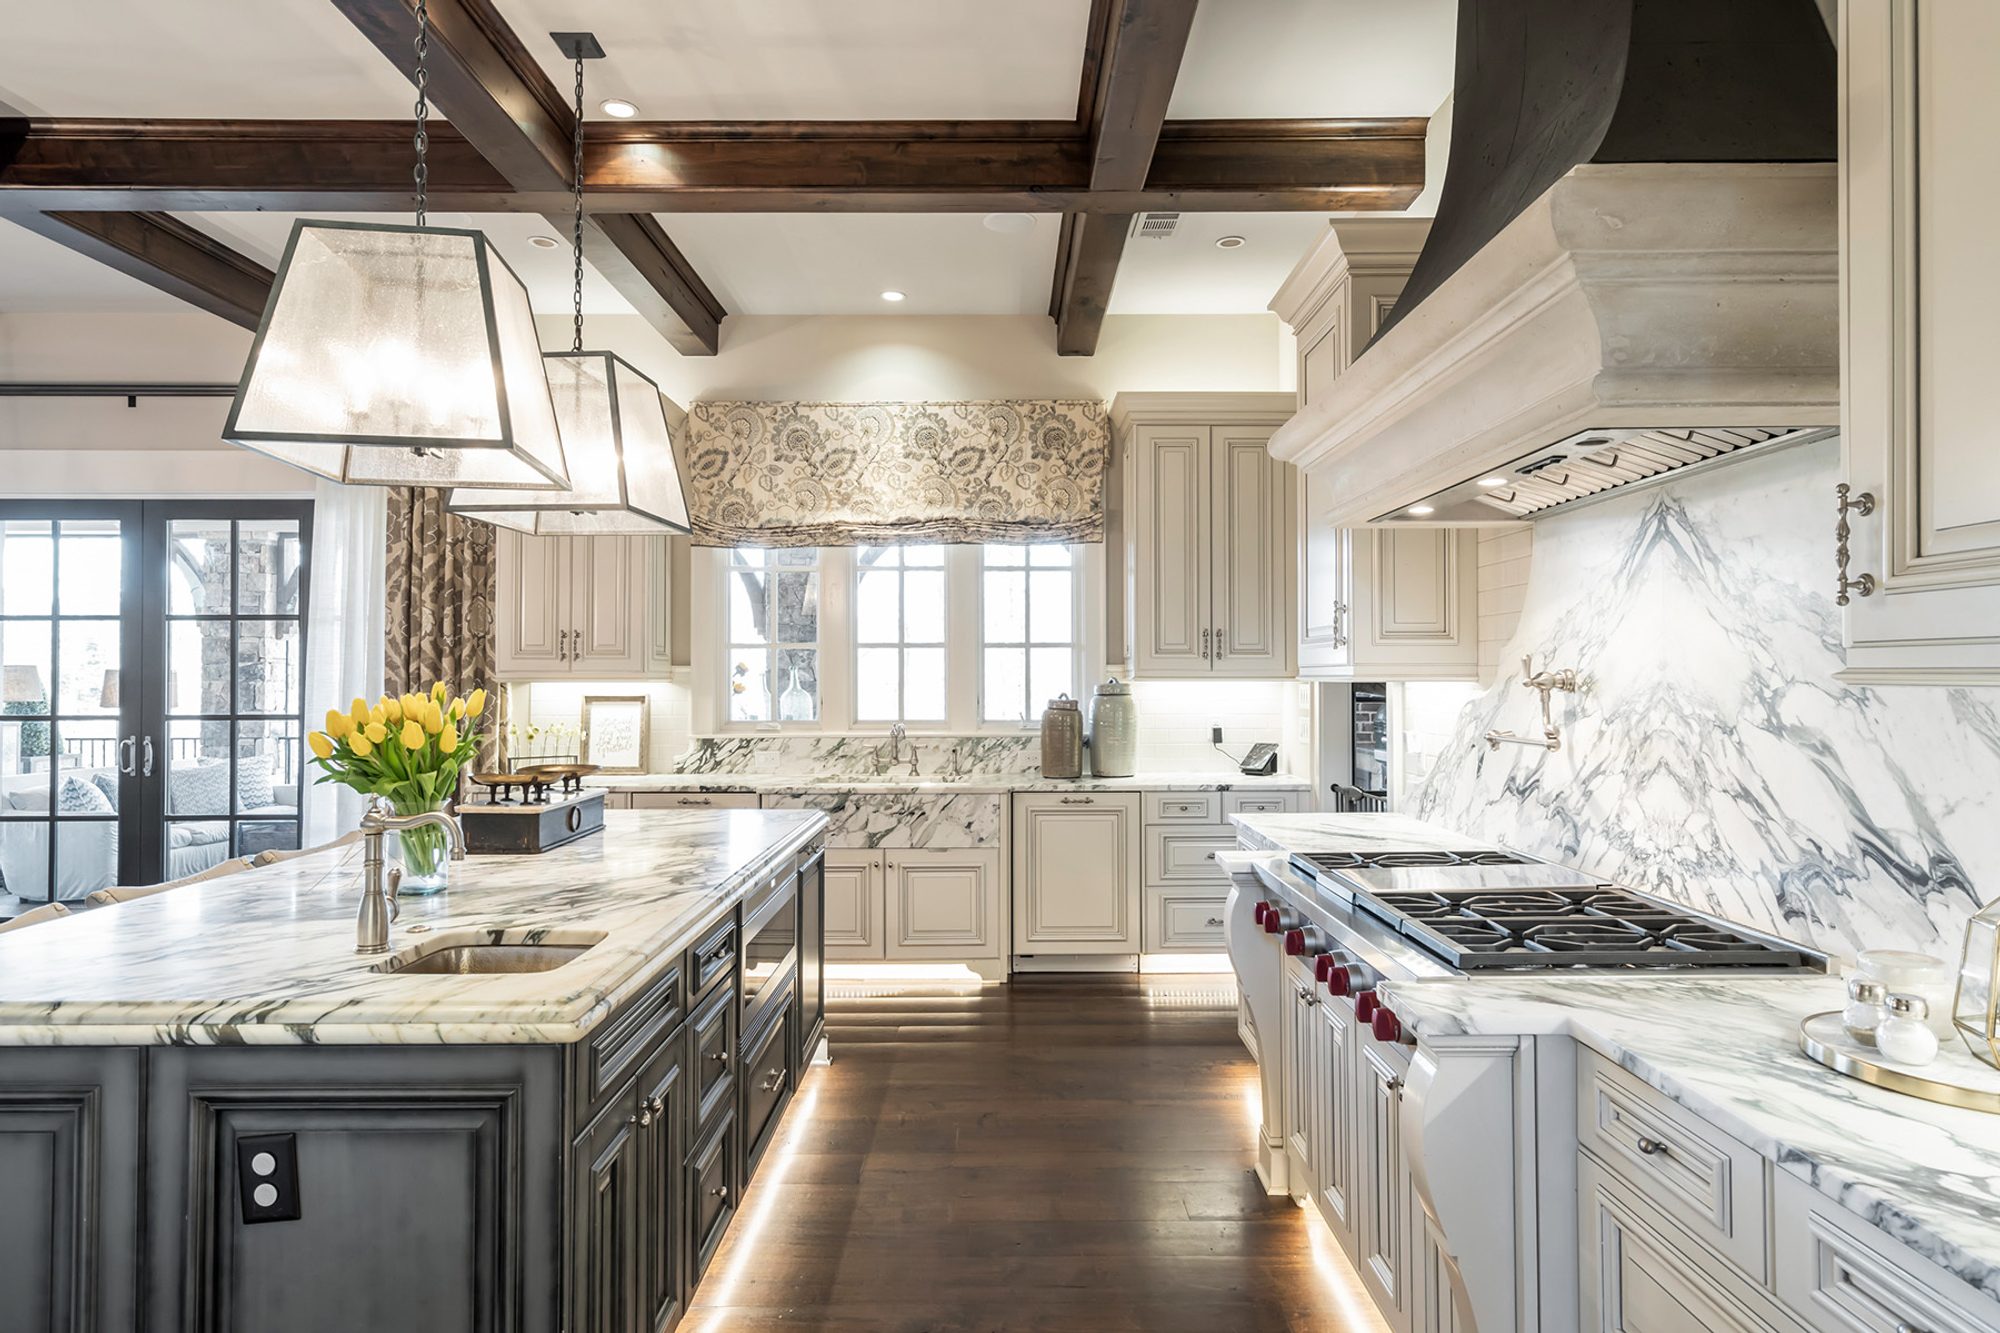 Luxury kitchen with marble slab backsplash, wolf stove, marble countertops, dark wood coffered ceiling.